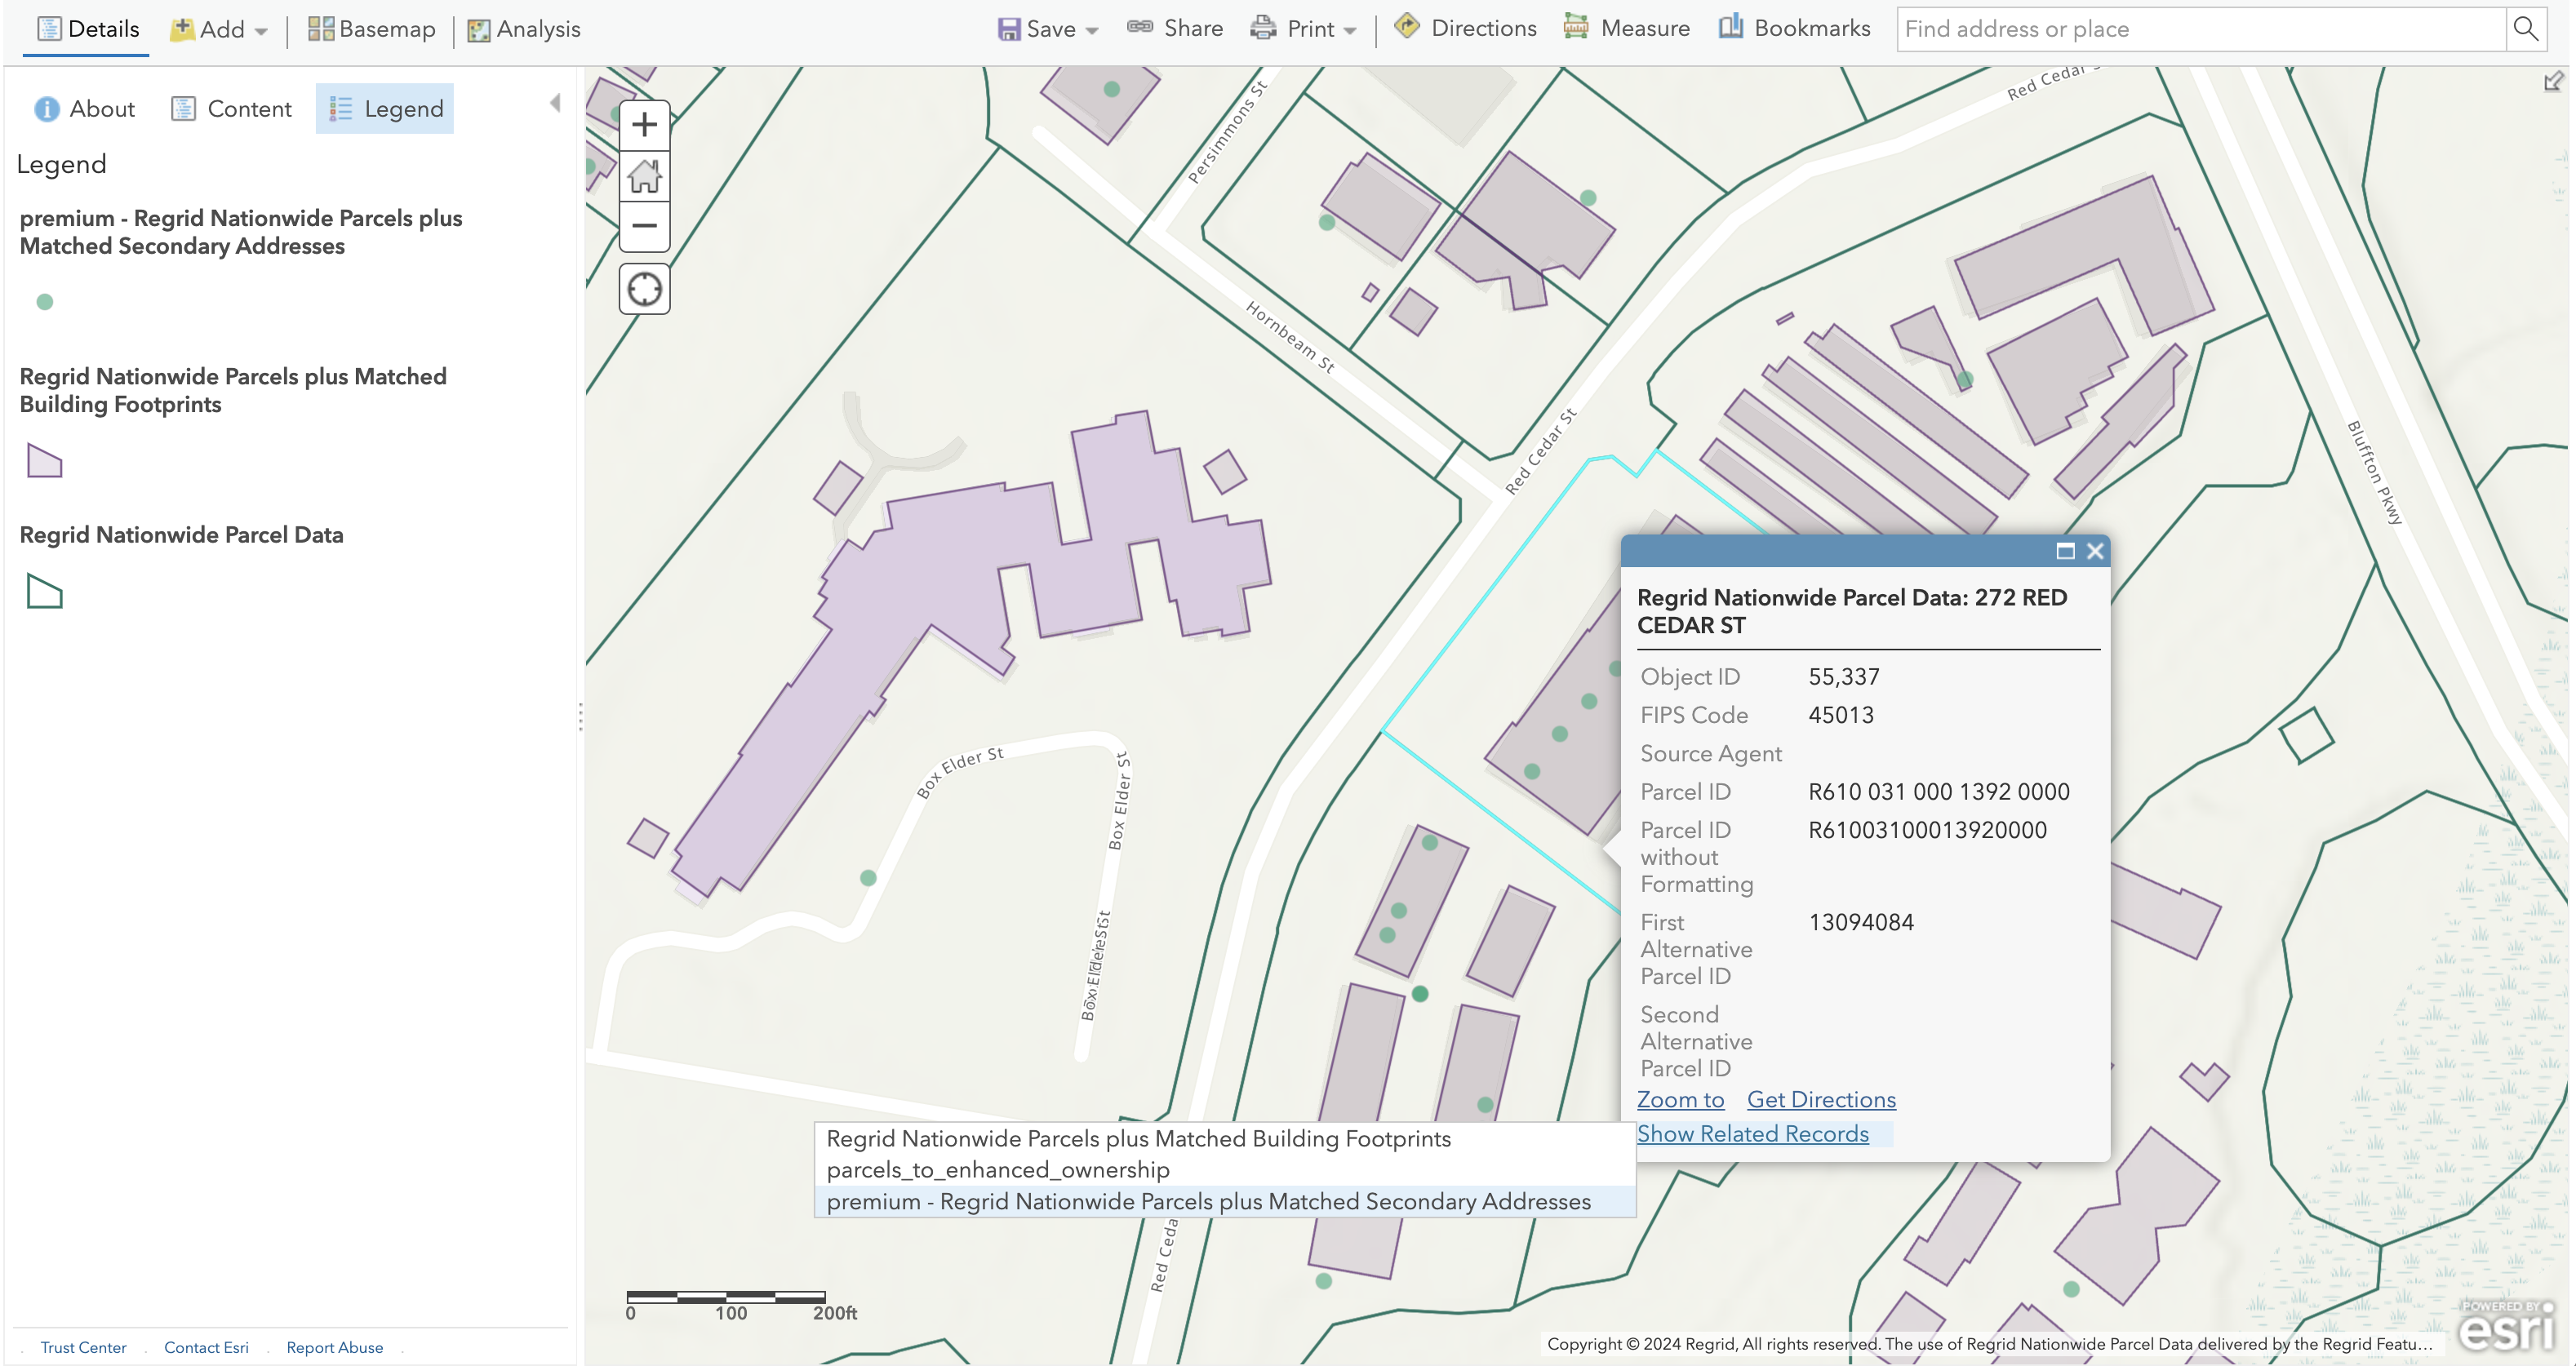 Accessing related records via the popup for a parcel in ArcGIS Online.